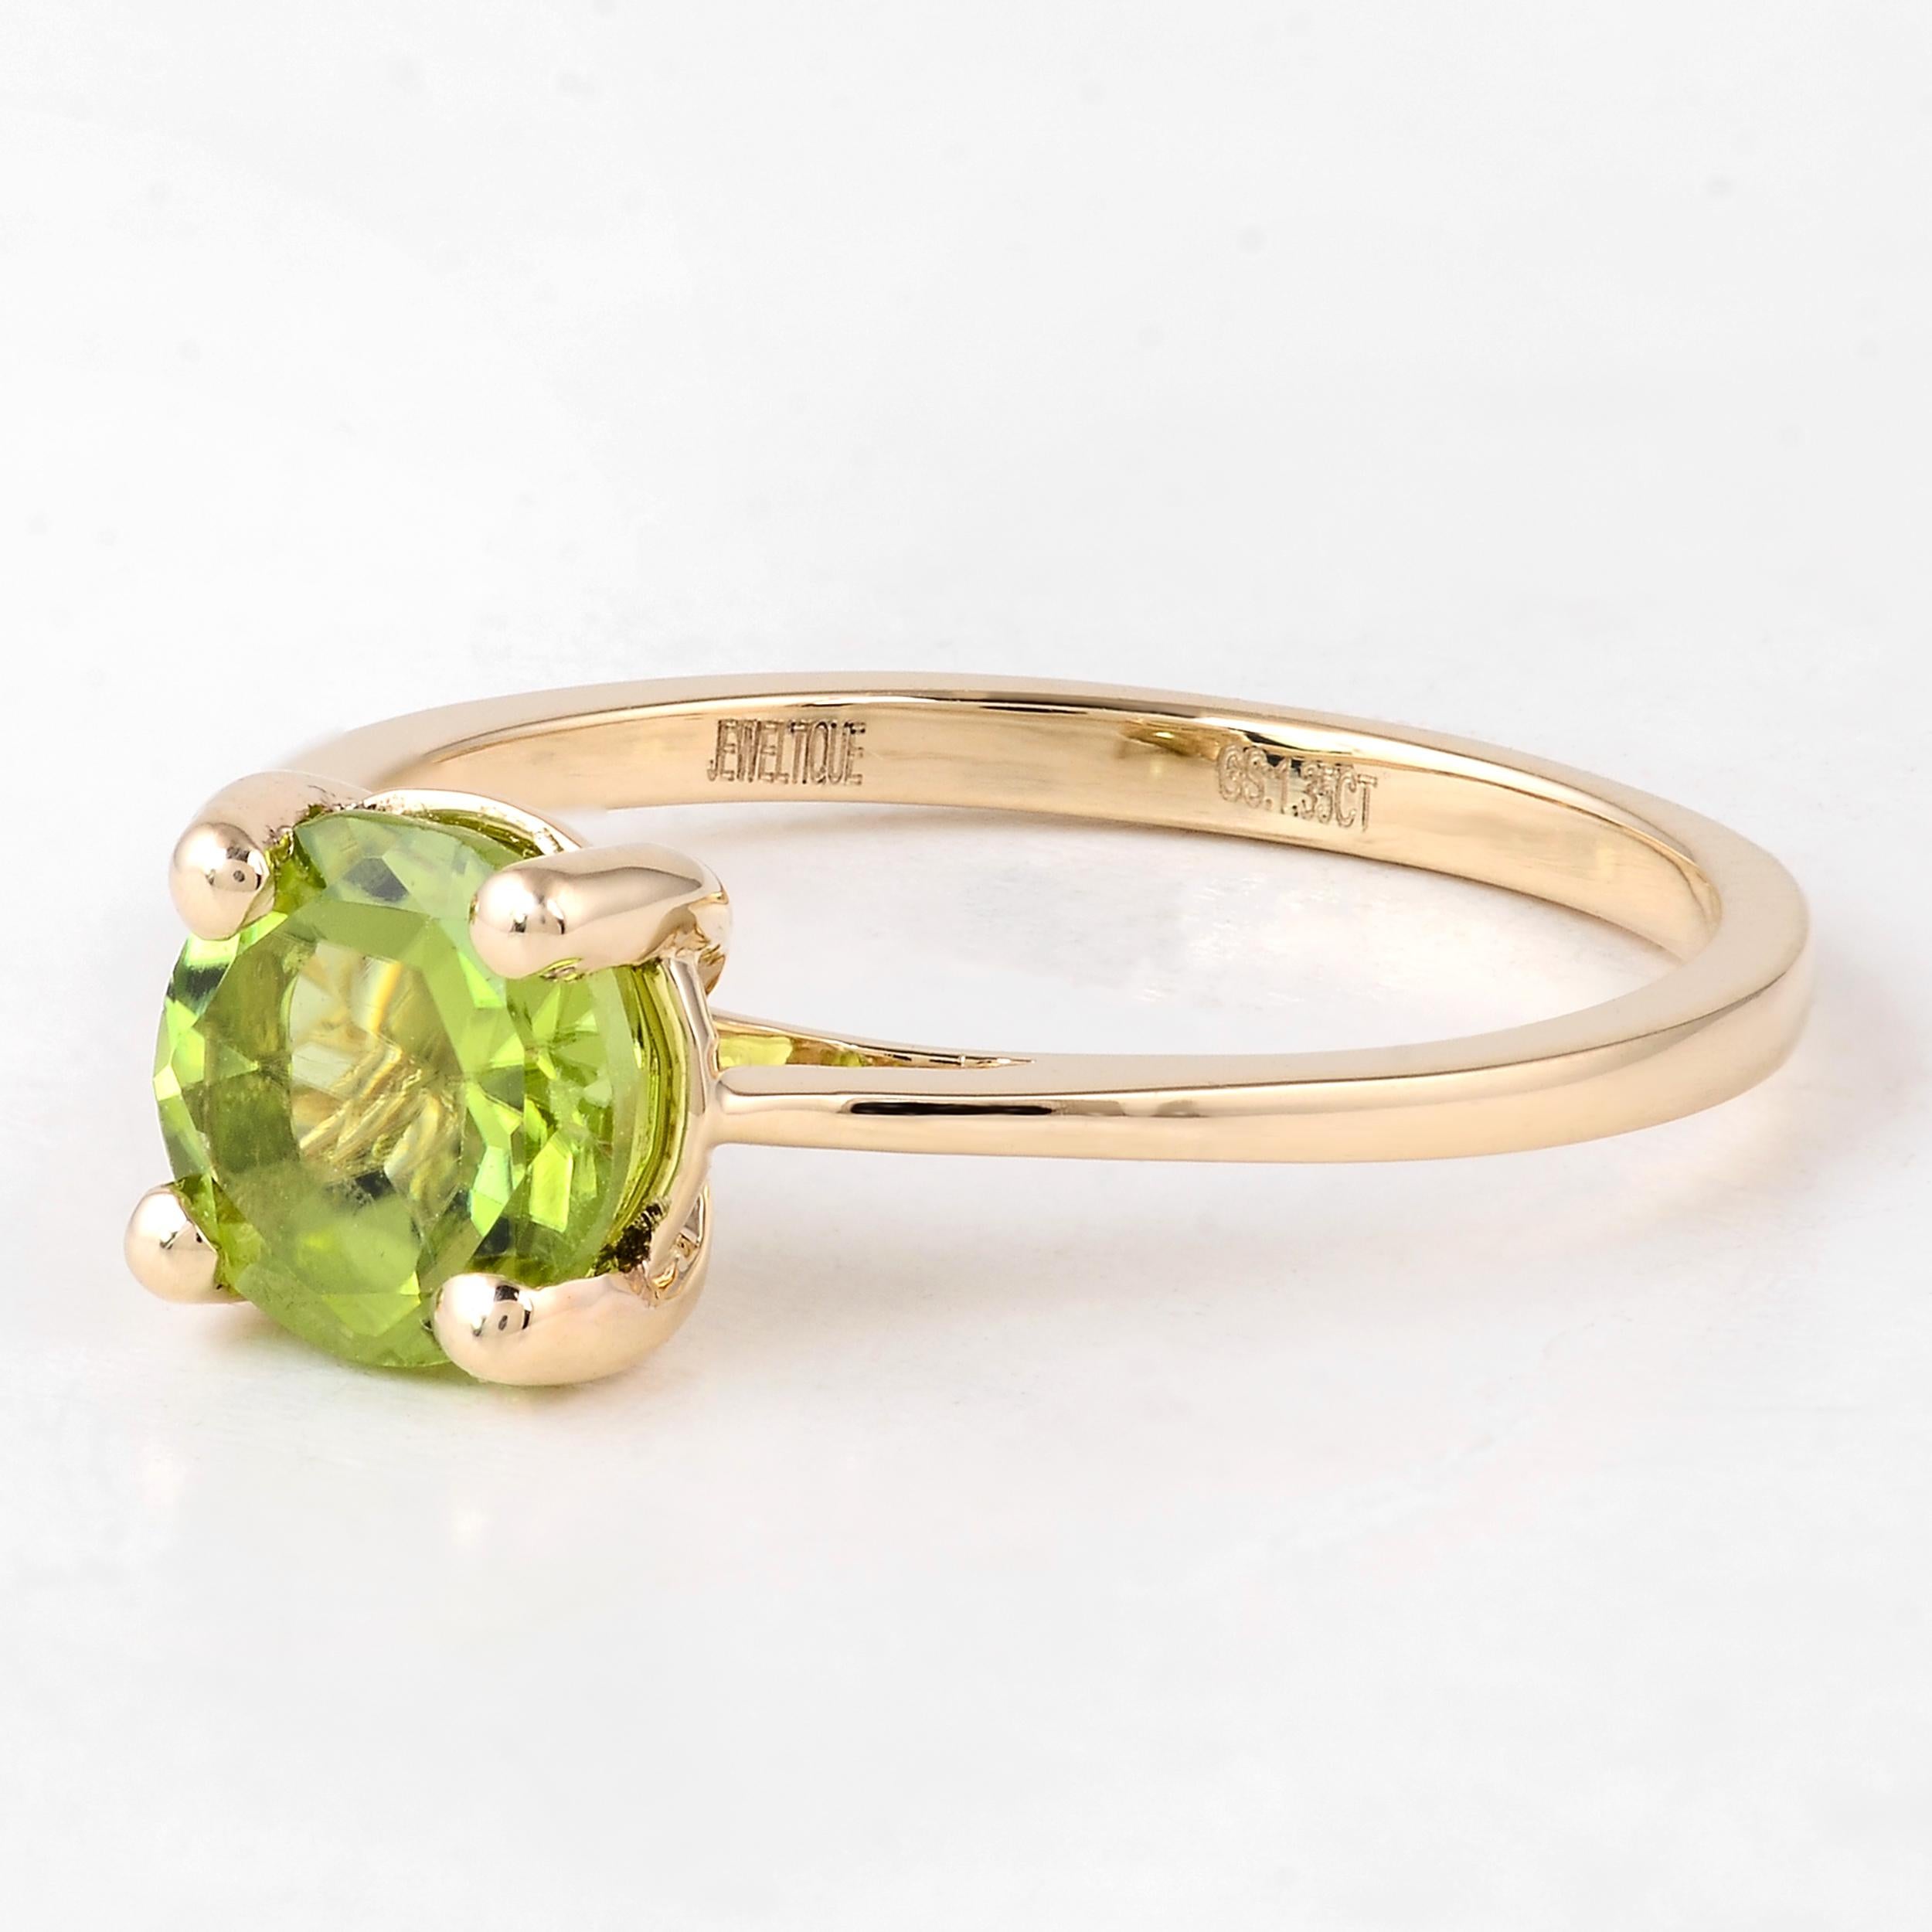 Brilliant Cut Chic 14K 1.09ct Peridot Solitaire Cocktail Ring, Size 7 - Statement Jewelry For Sale